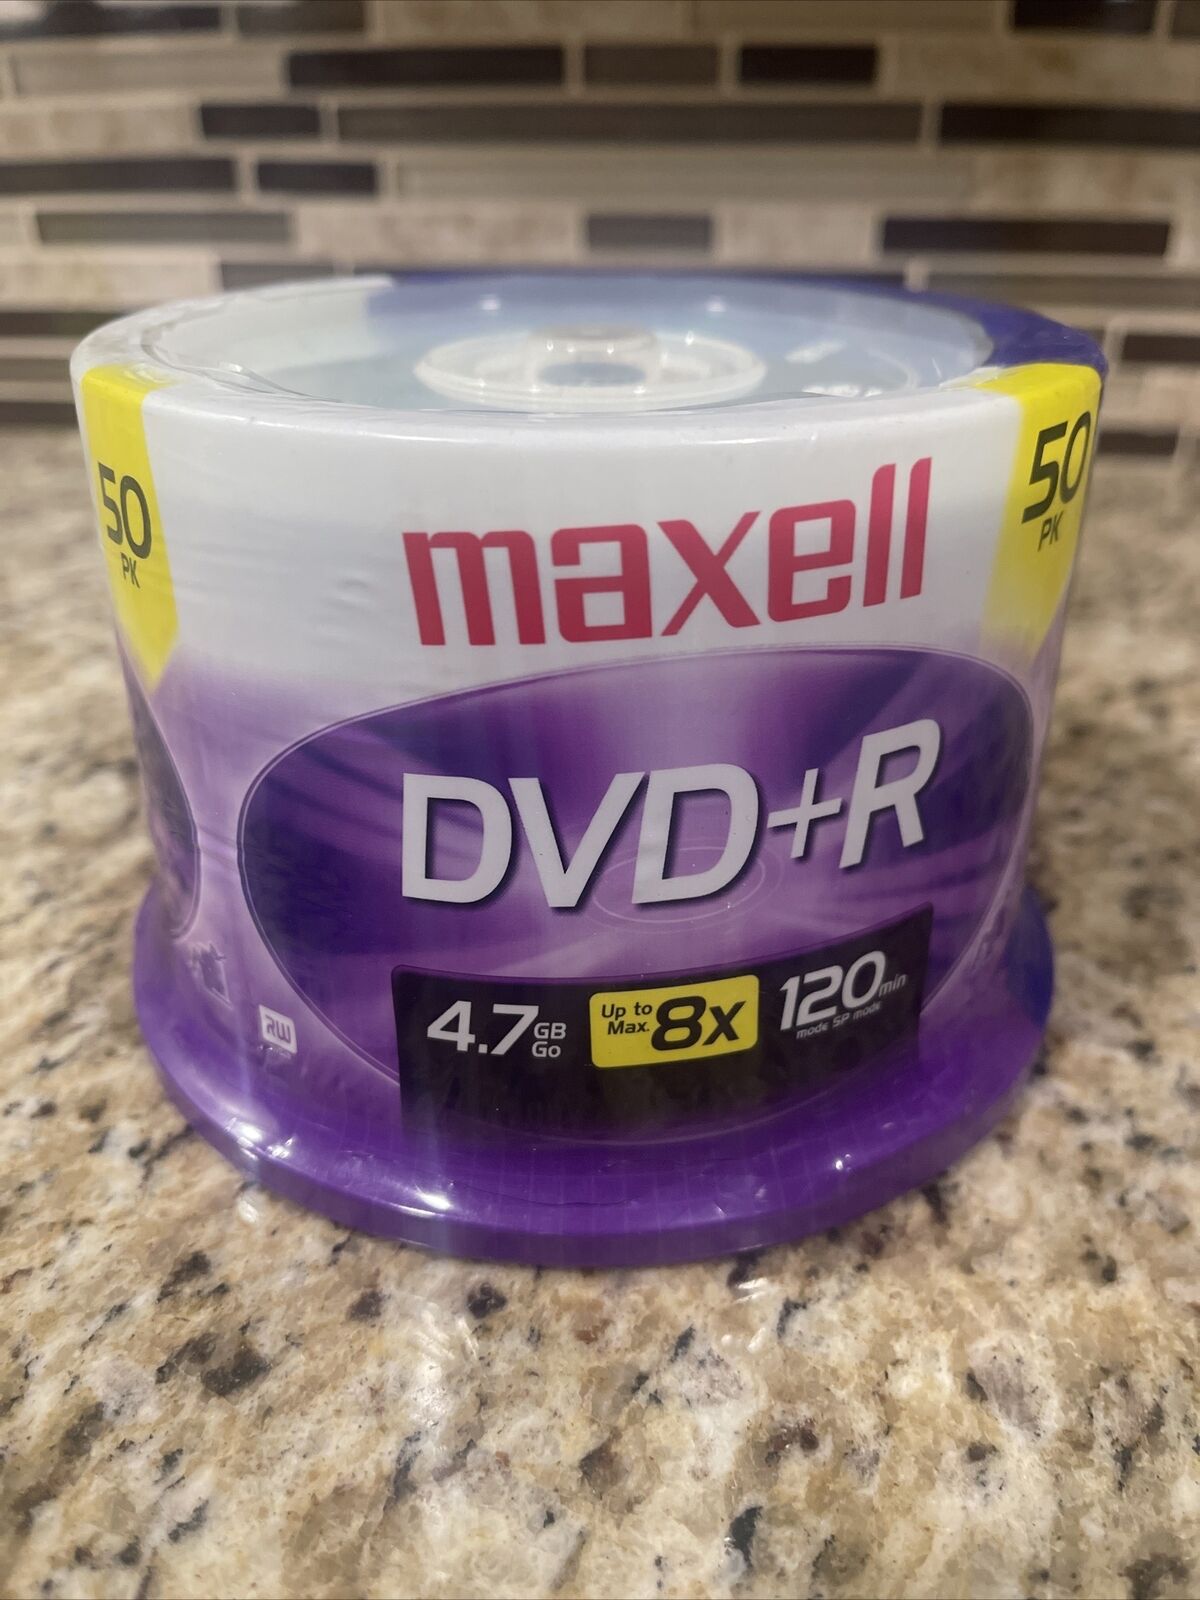 Maxell DVD+R 50pk 4.7 GB 8X 120 Min Spindle Brand New Sealed